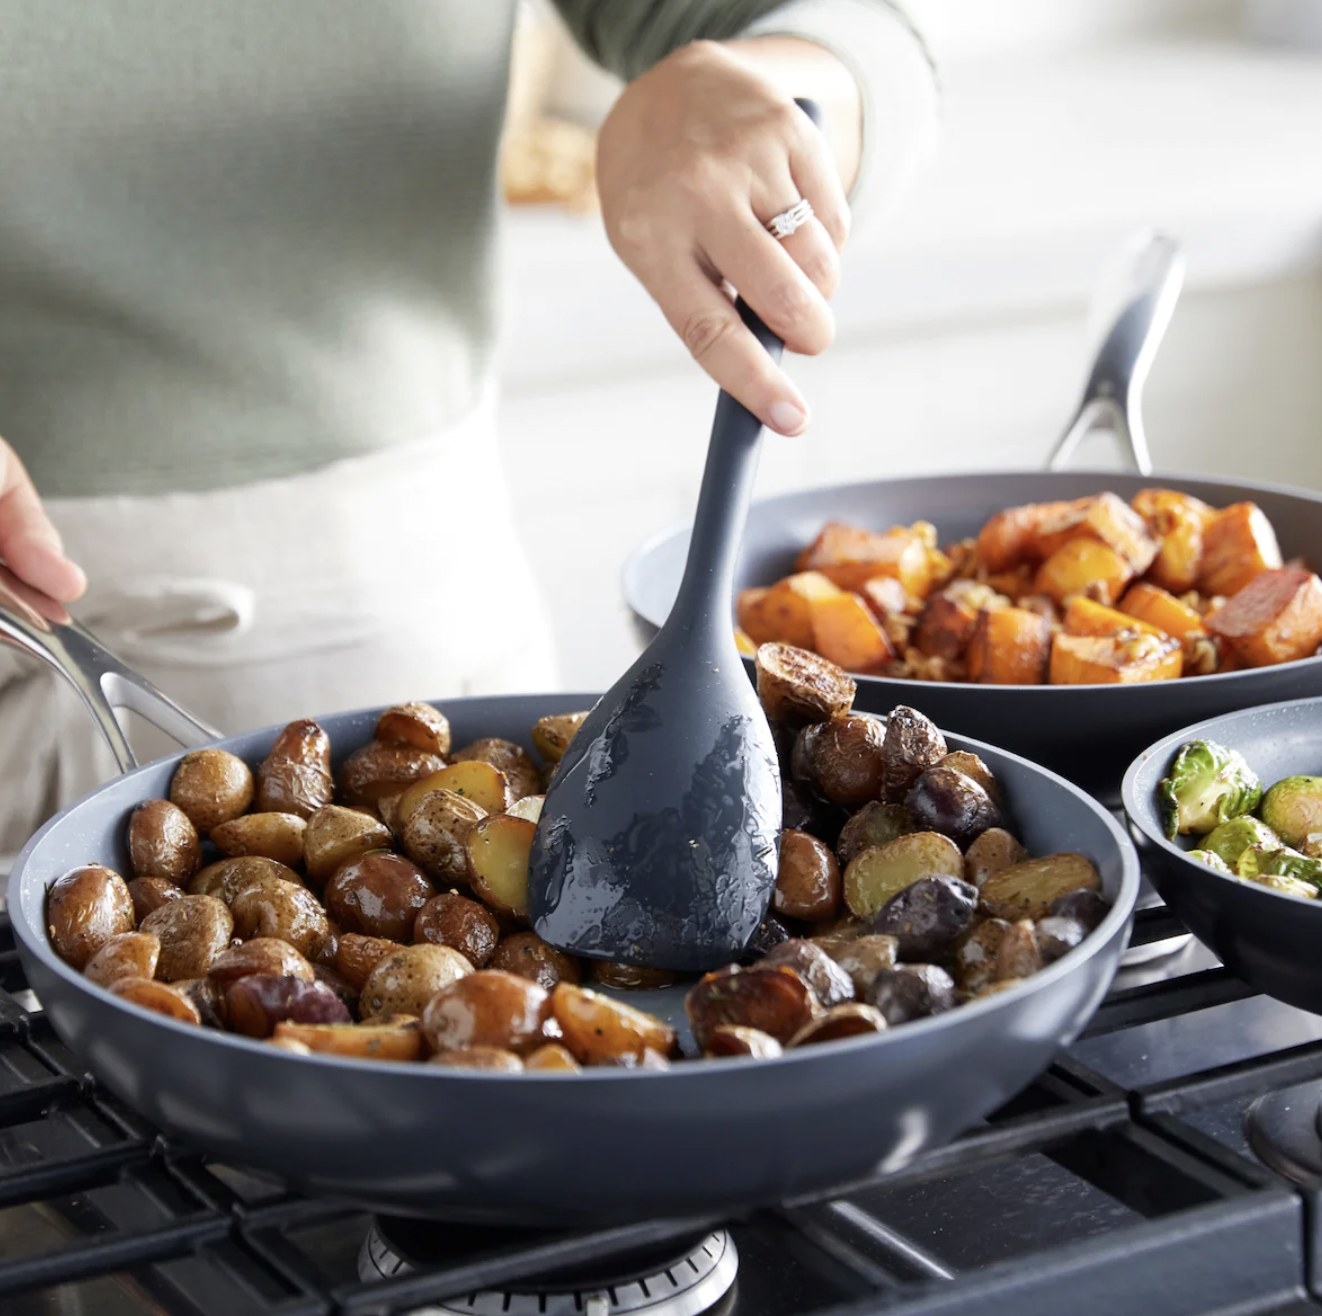 Someone sauteing pan roasted potatoes on stove, with fry pans of sweet potatoes and brussel sprouts on other burners